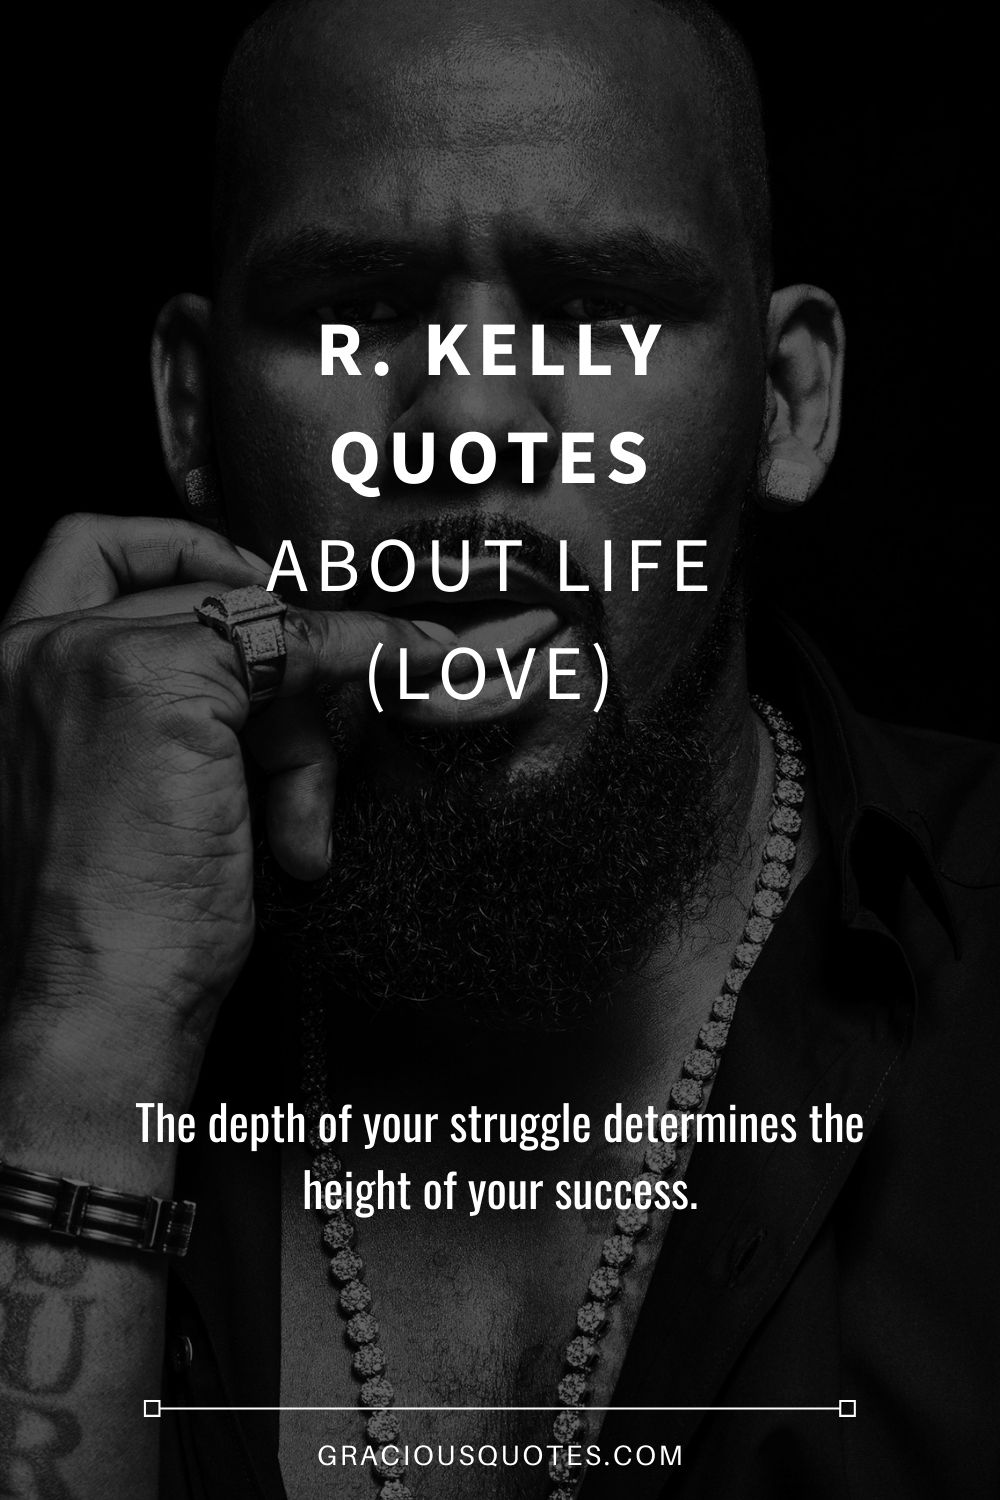 R. Kelly Quotes About Life (LOVE) - Gracious Quotes